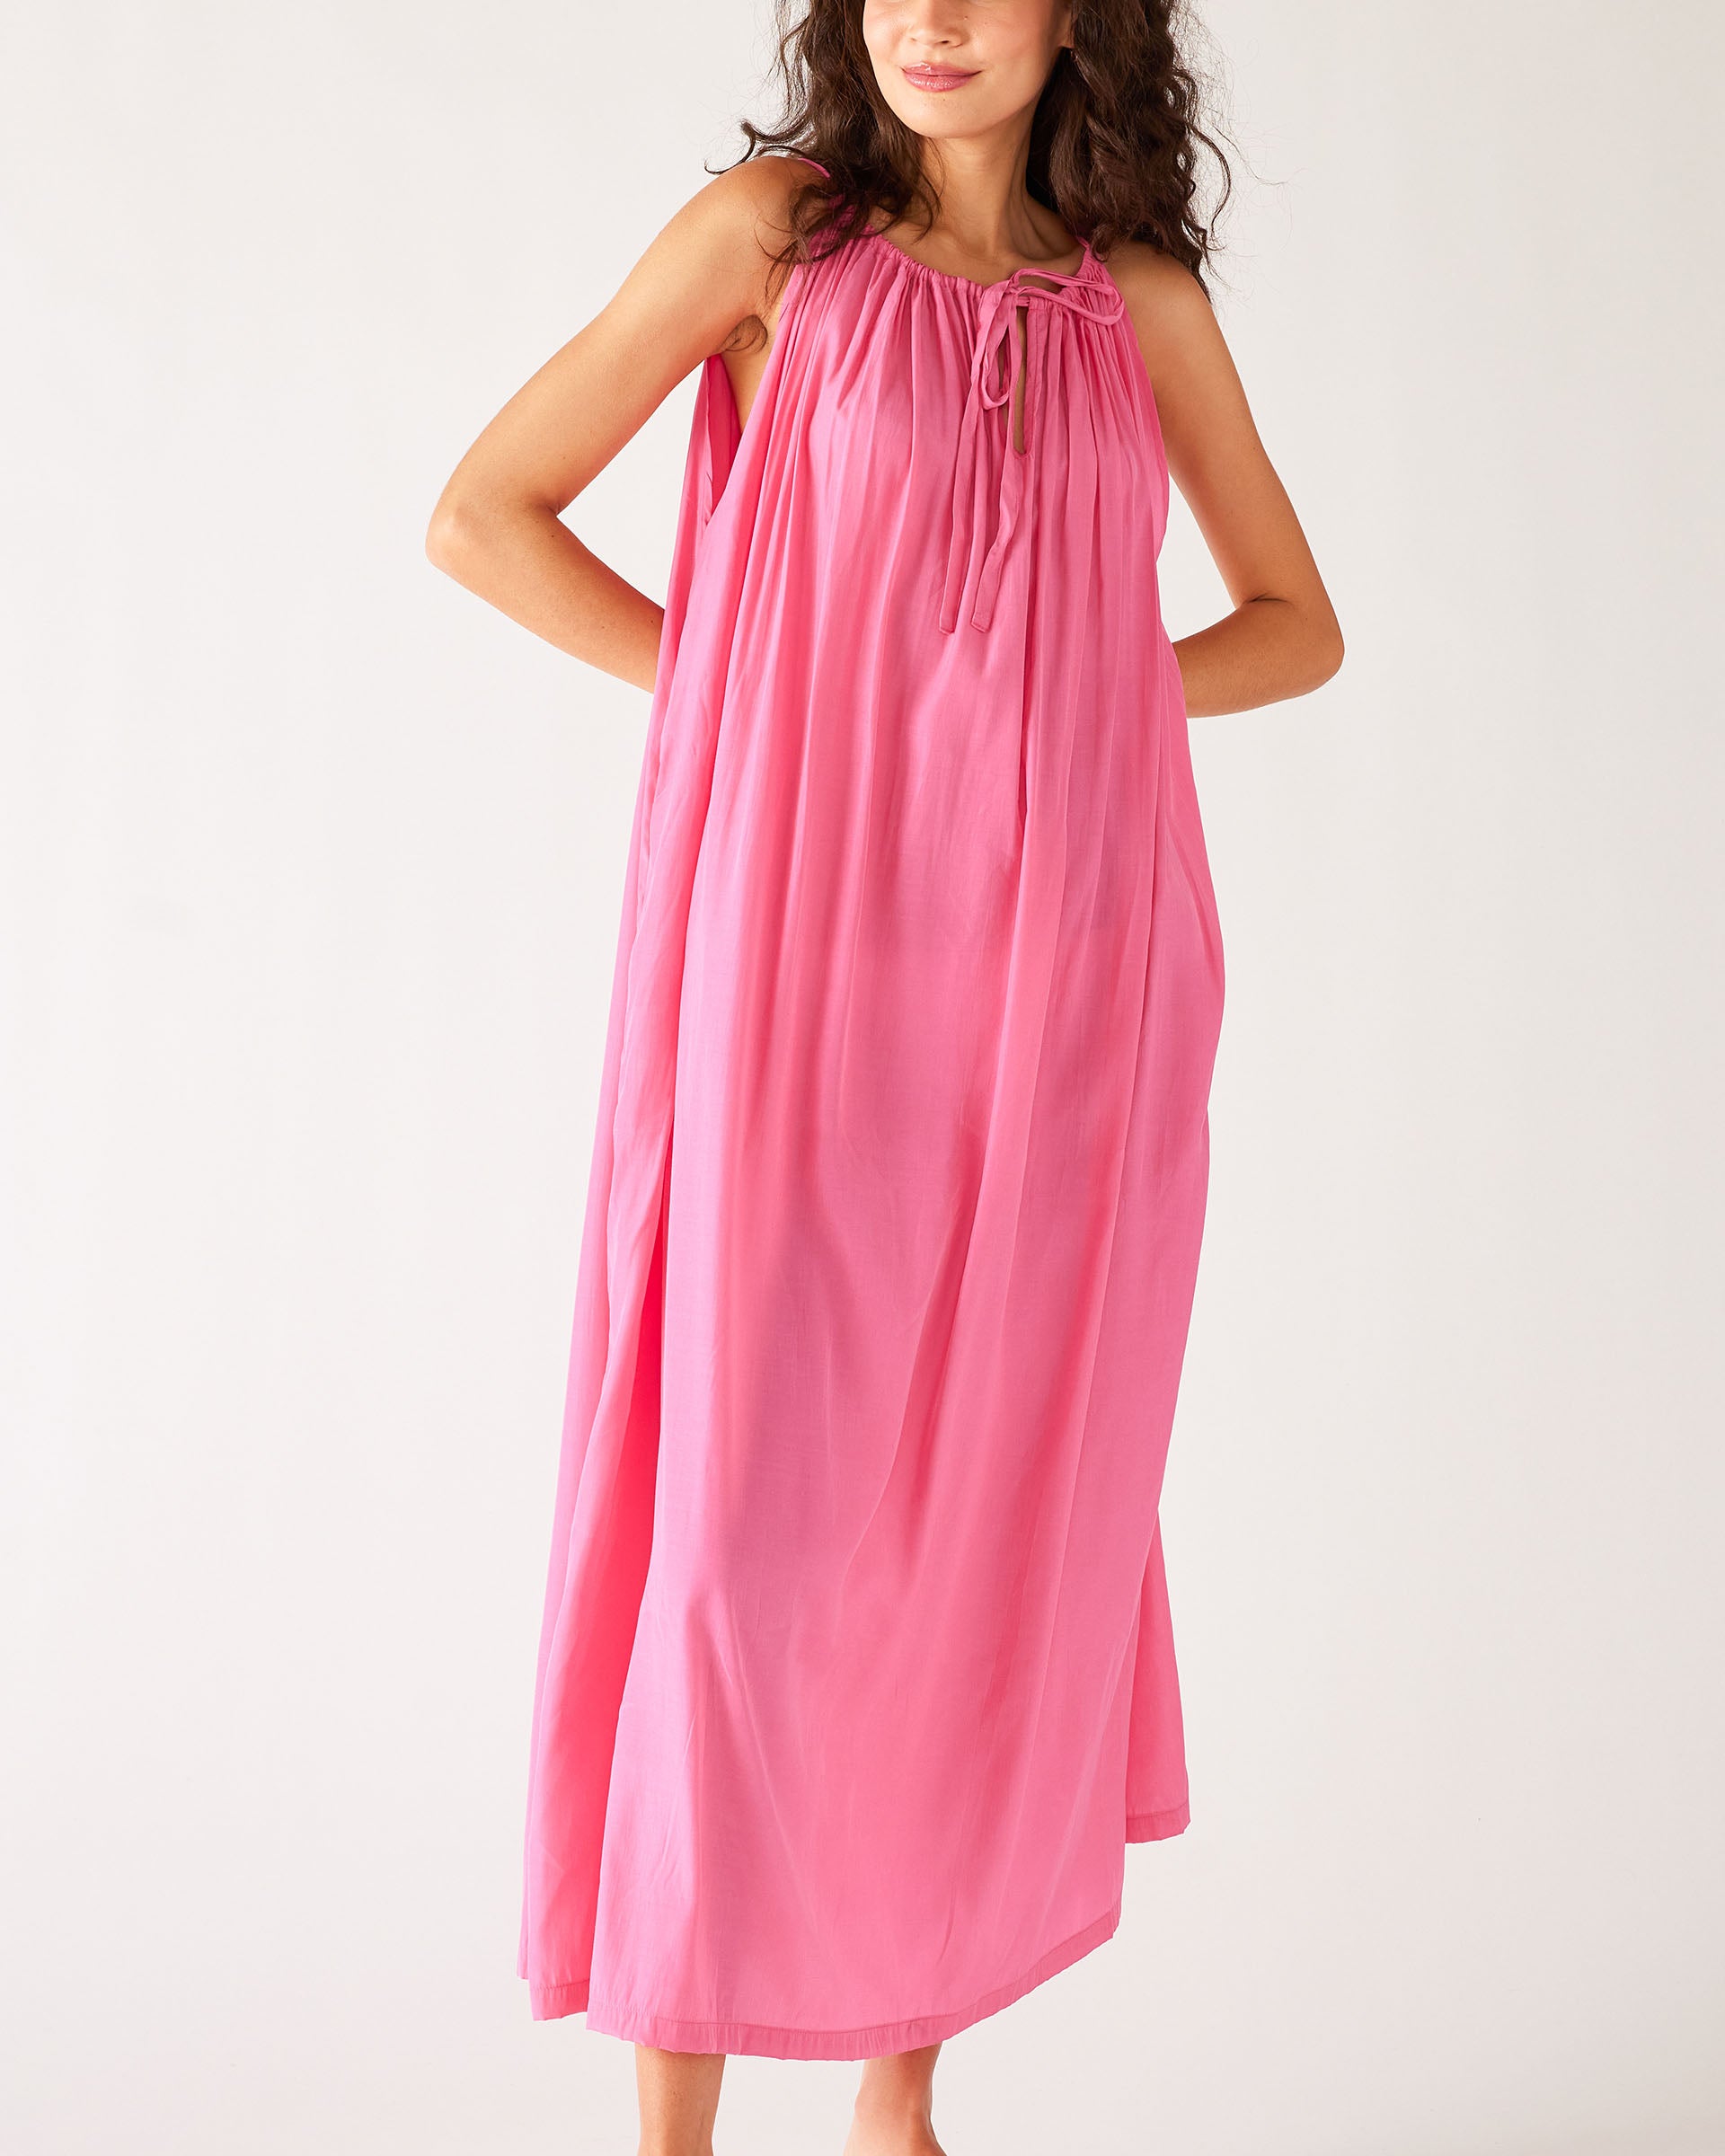 Women's Bright Pink Loose Fit Pullover Maxi Dress Full Body Front View